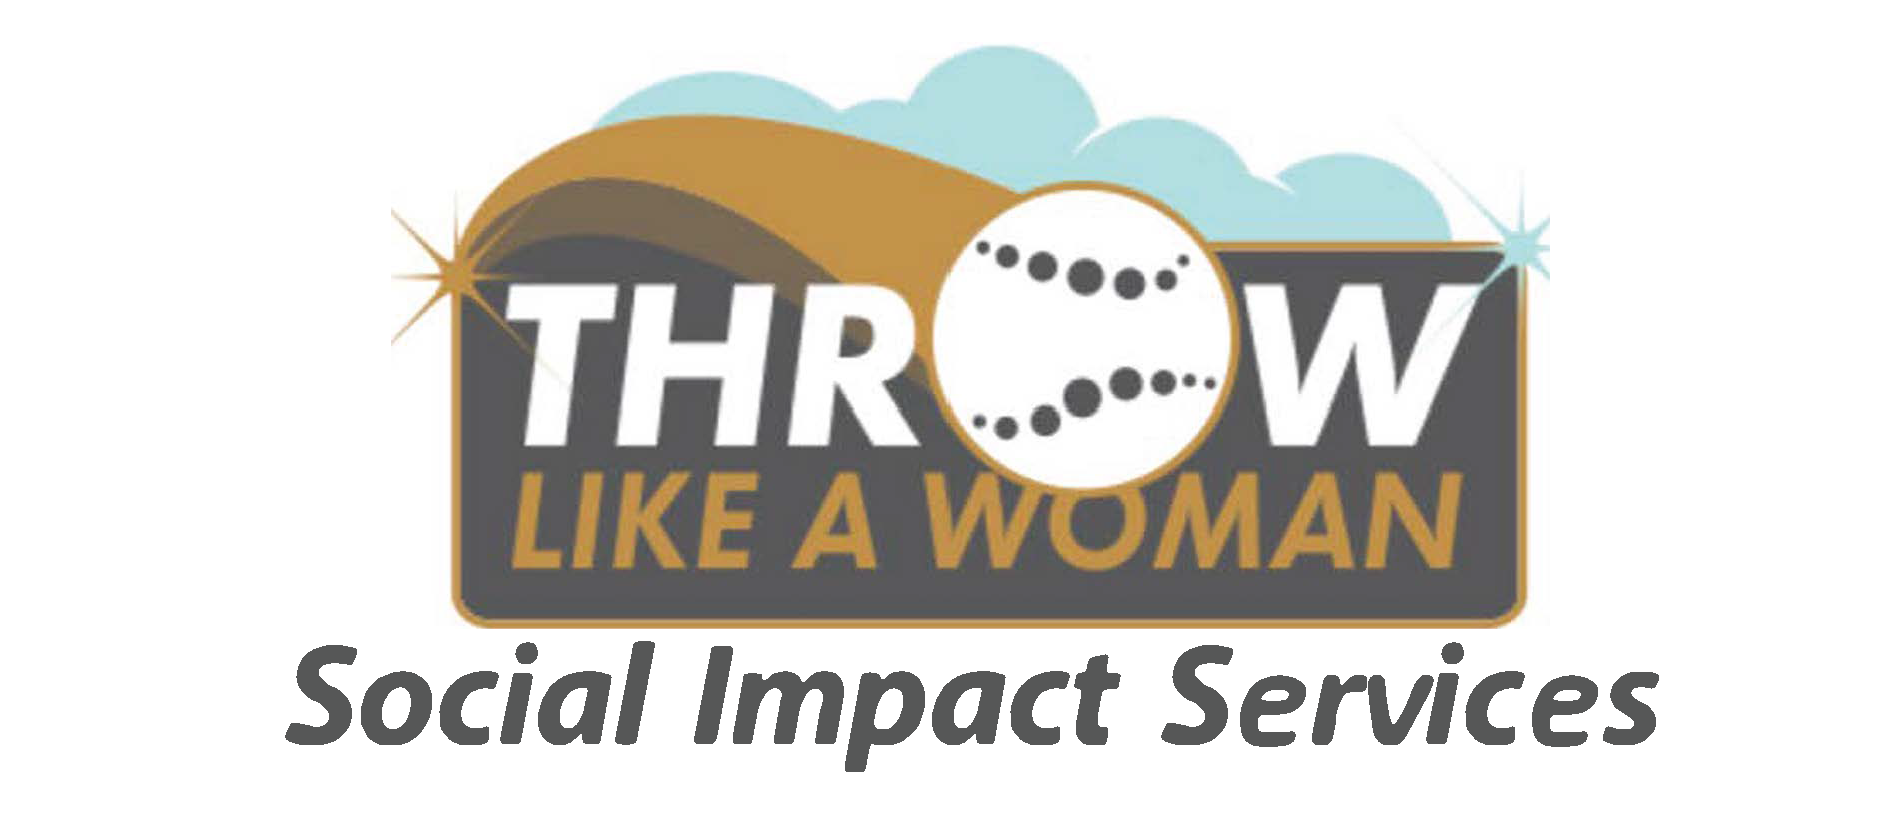 Throw Like a Woman, Social Impact Services